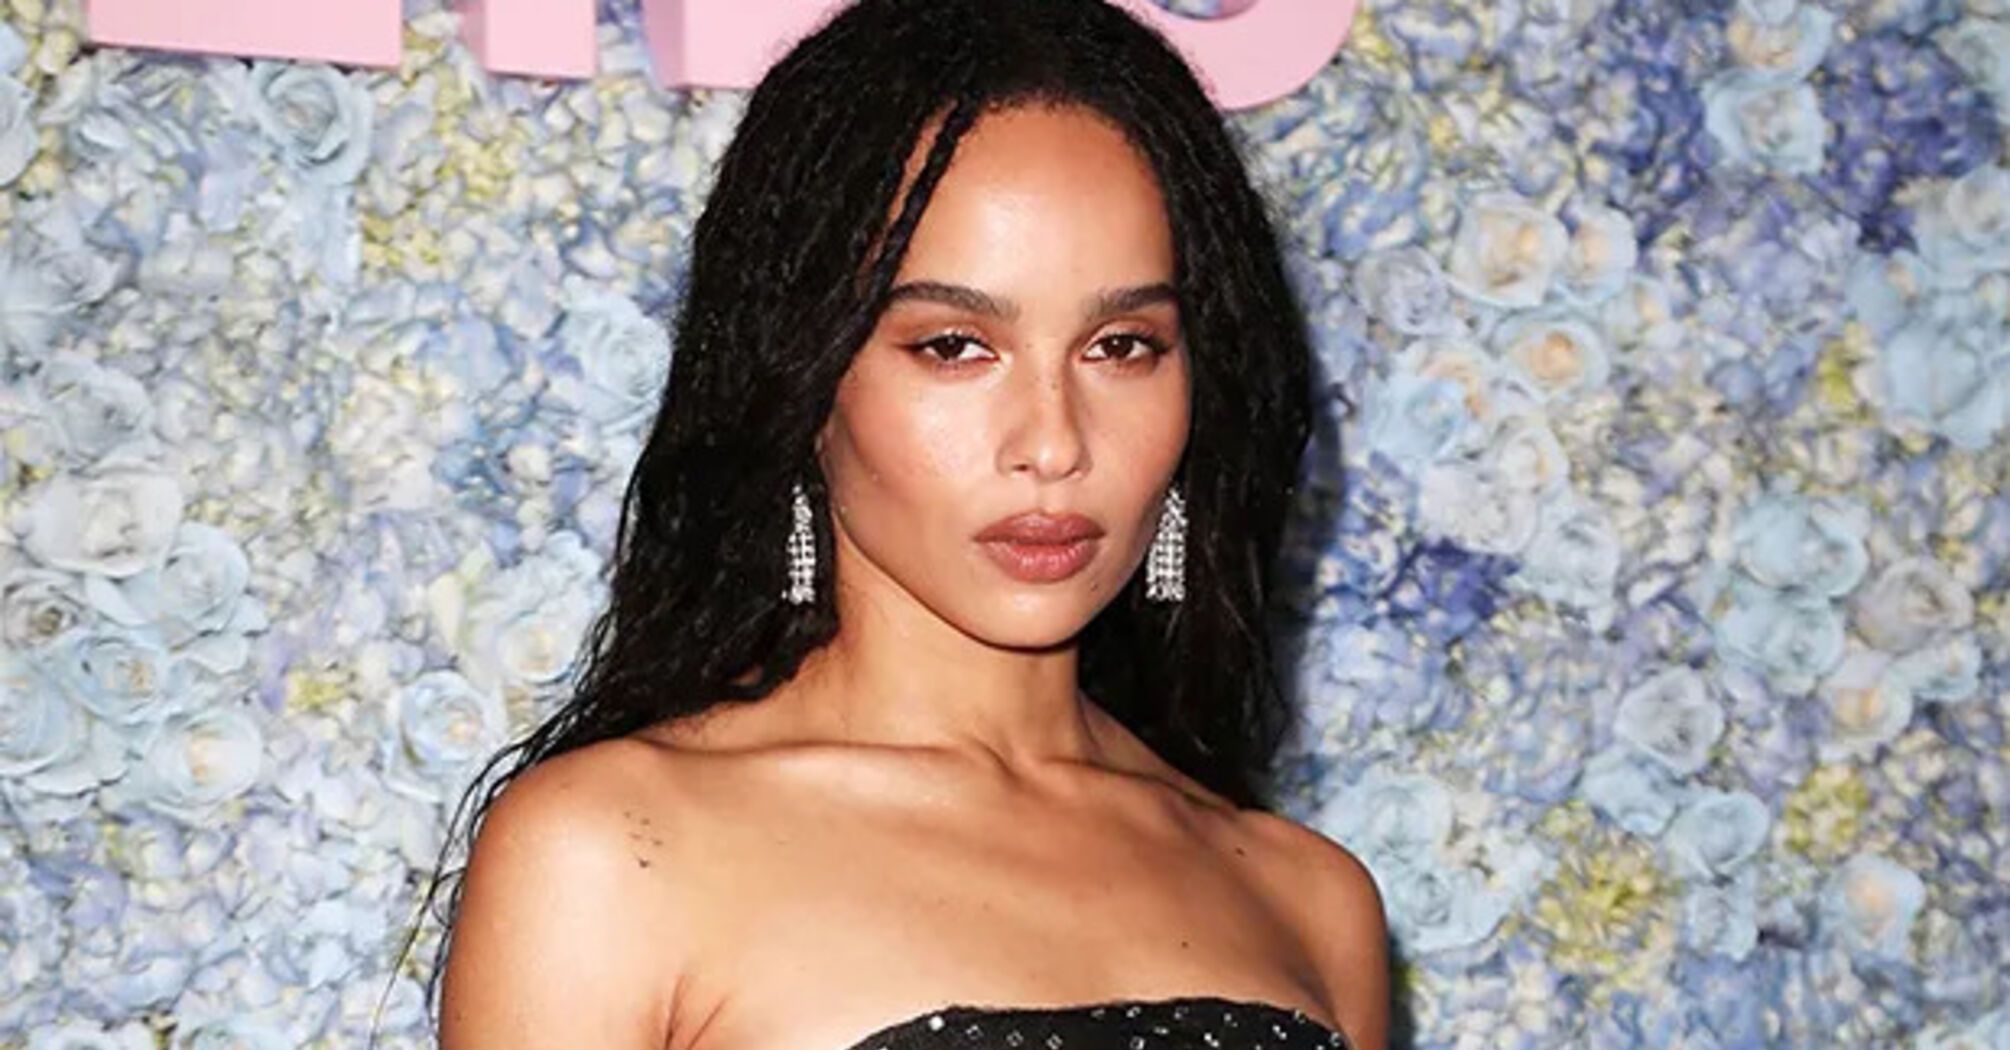 10 Facts about Zoe Kravitz, the X-Men Actress Who Now Plays Catwoman